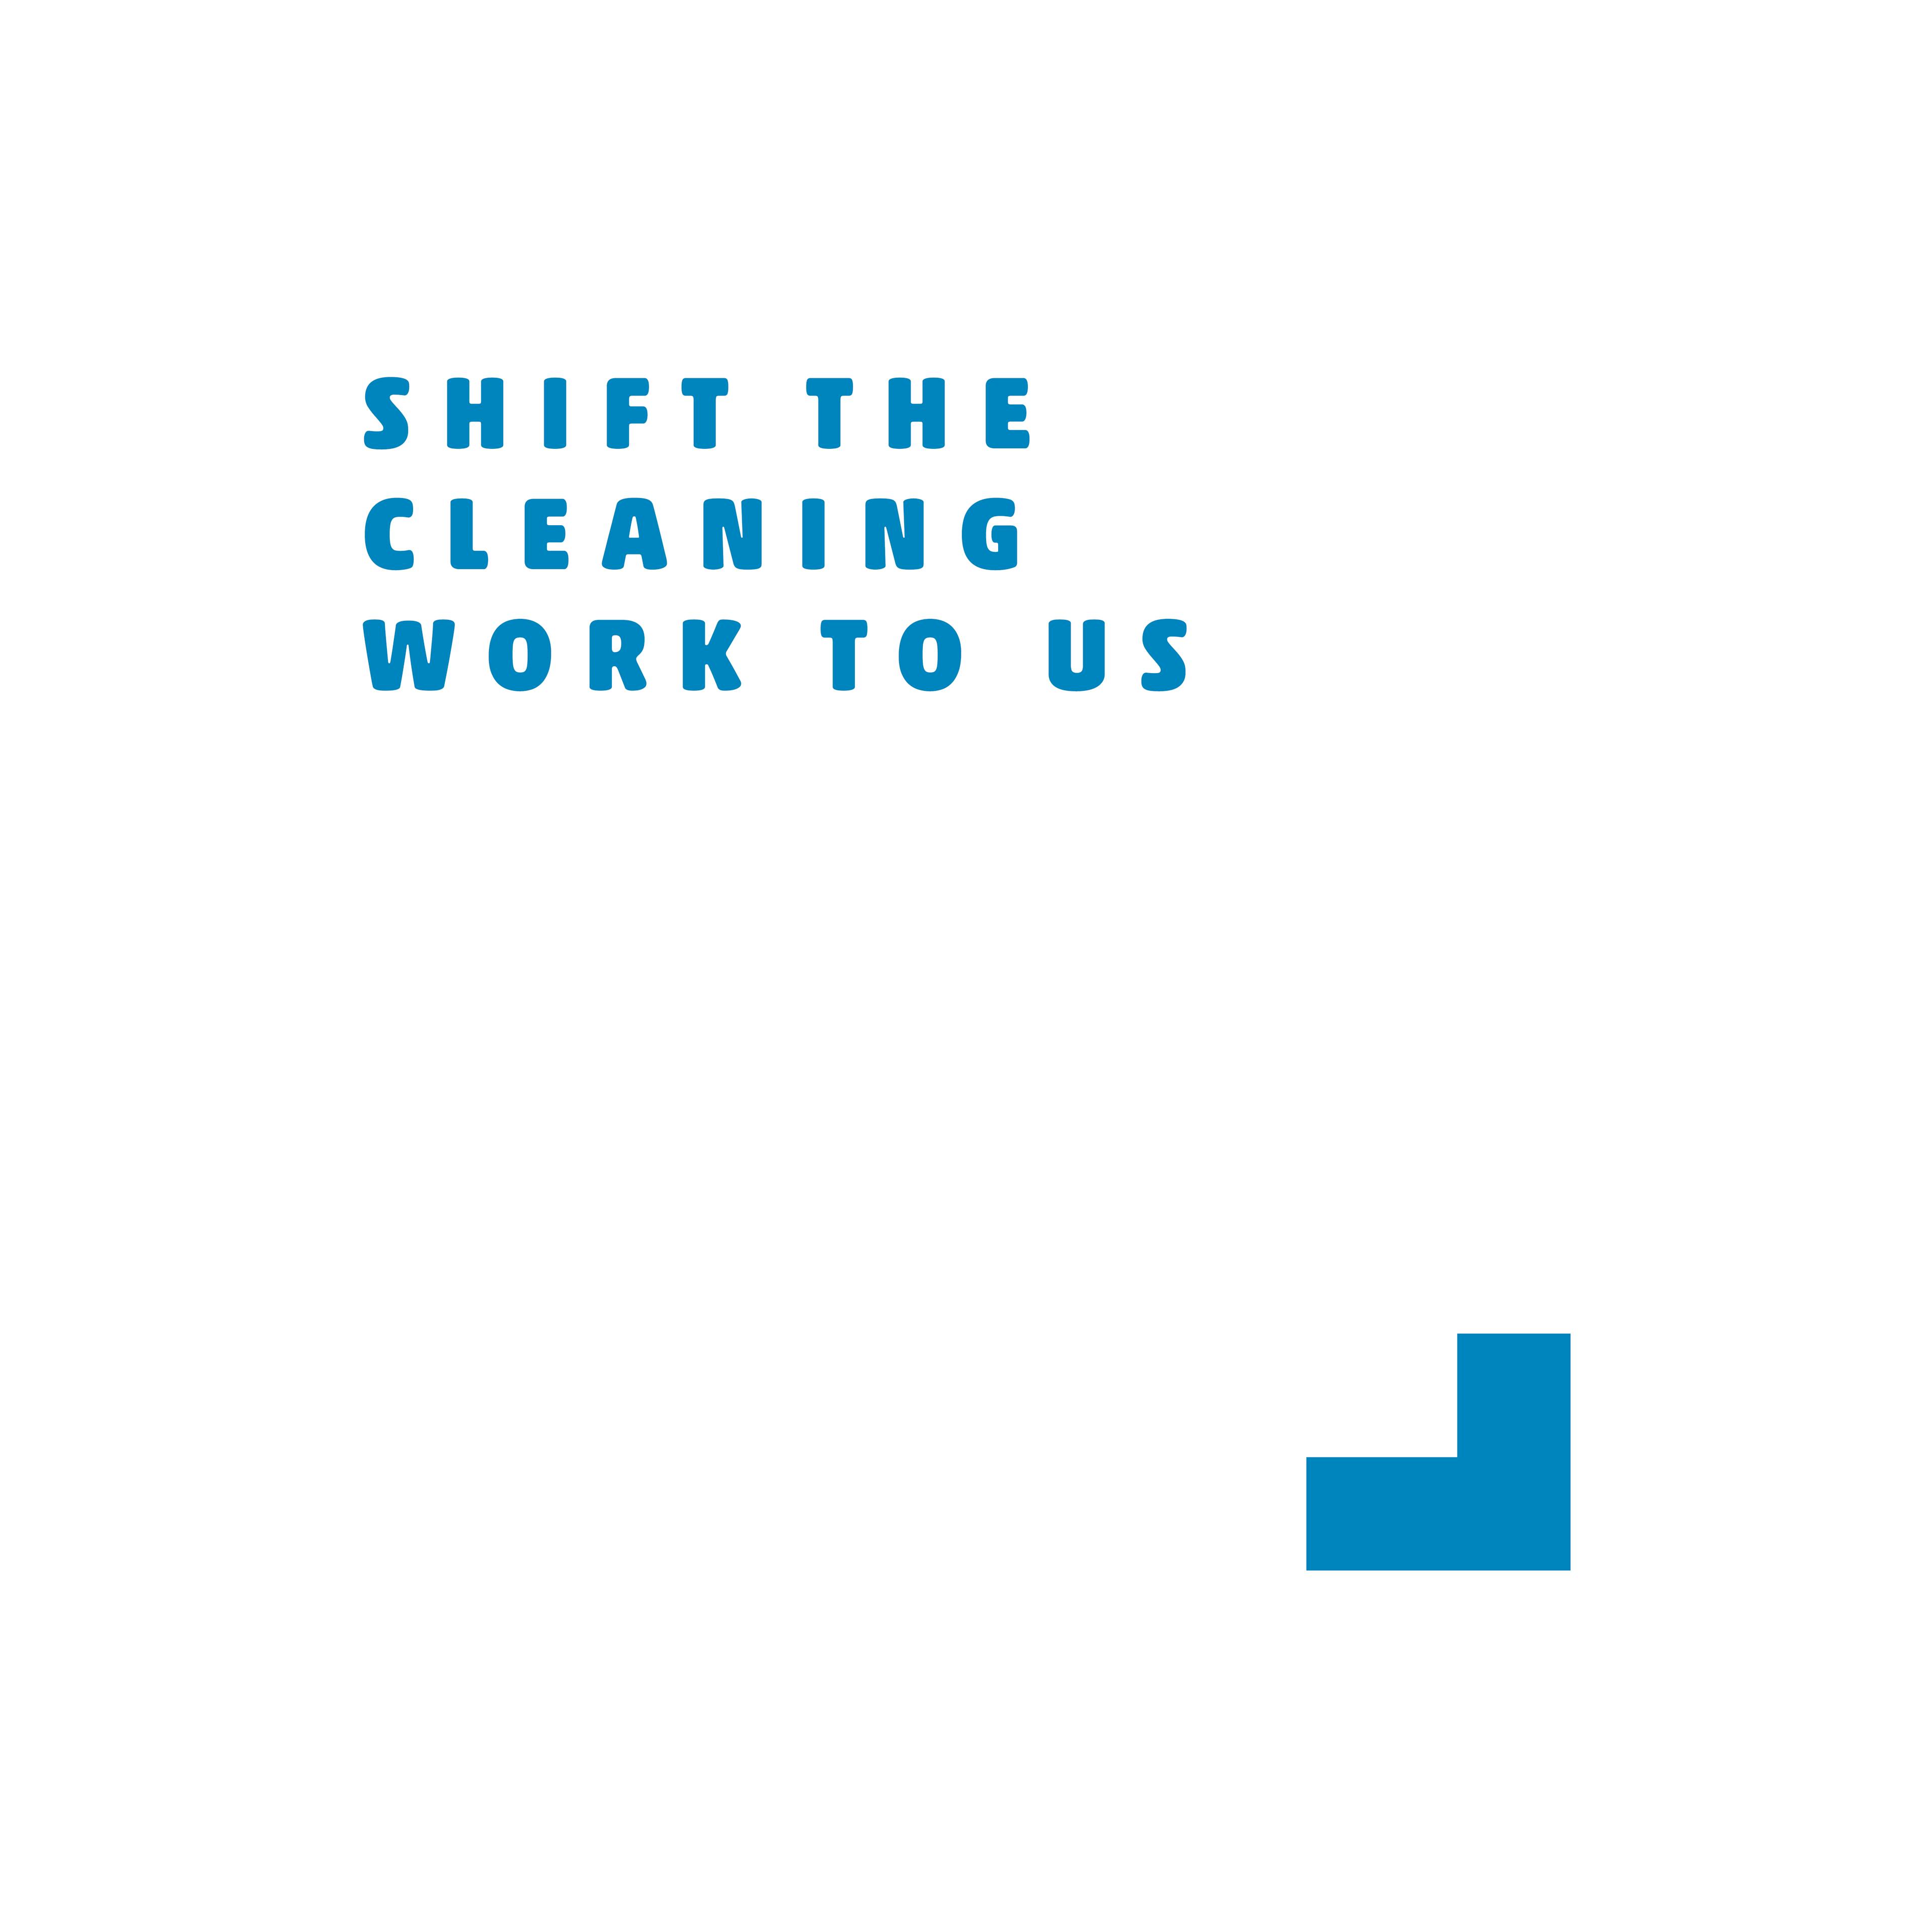 Shift the cleaning work to us, in large type, with the brand icon at the corner.